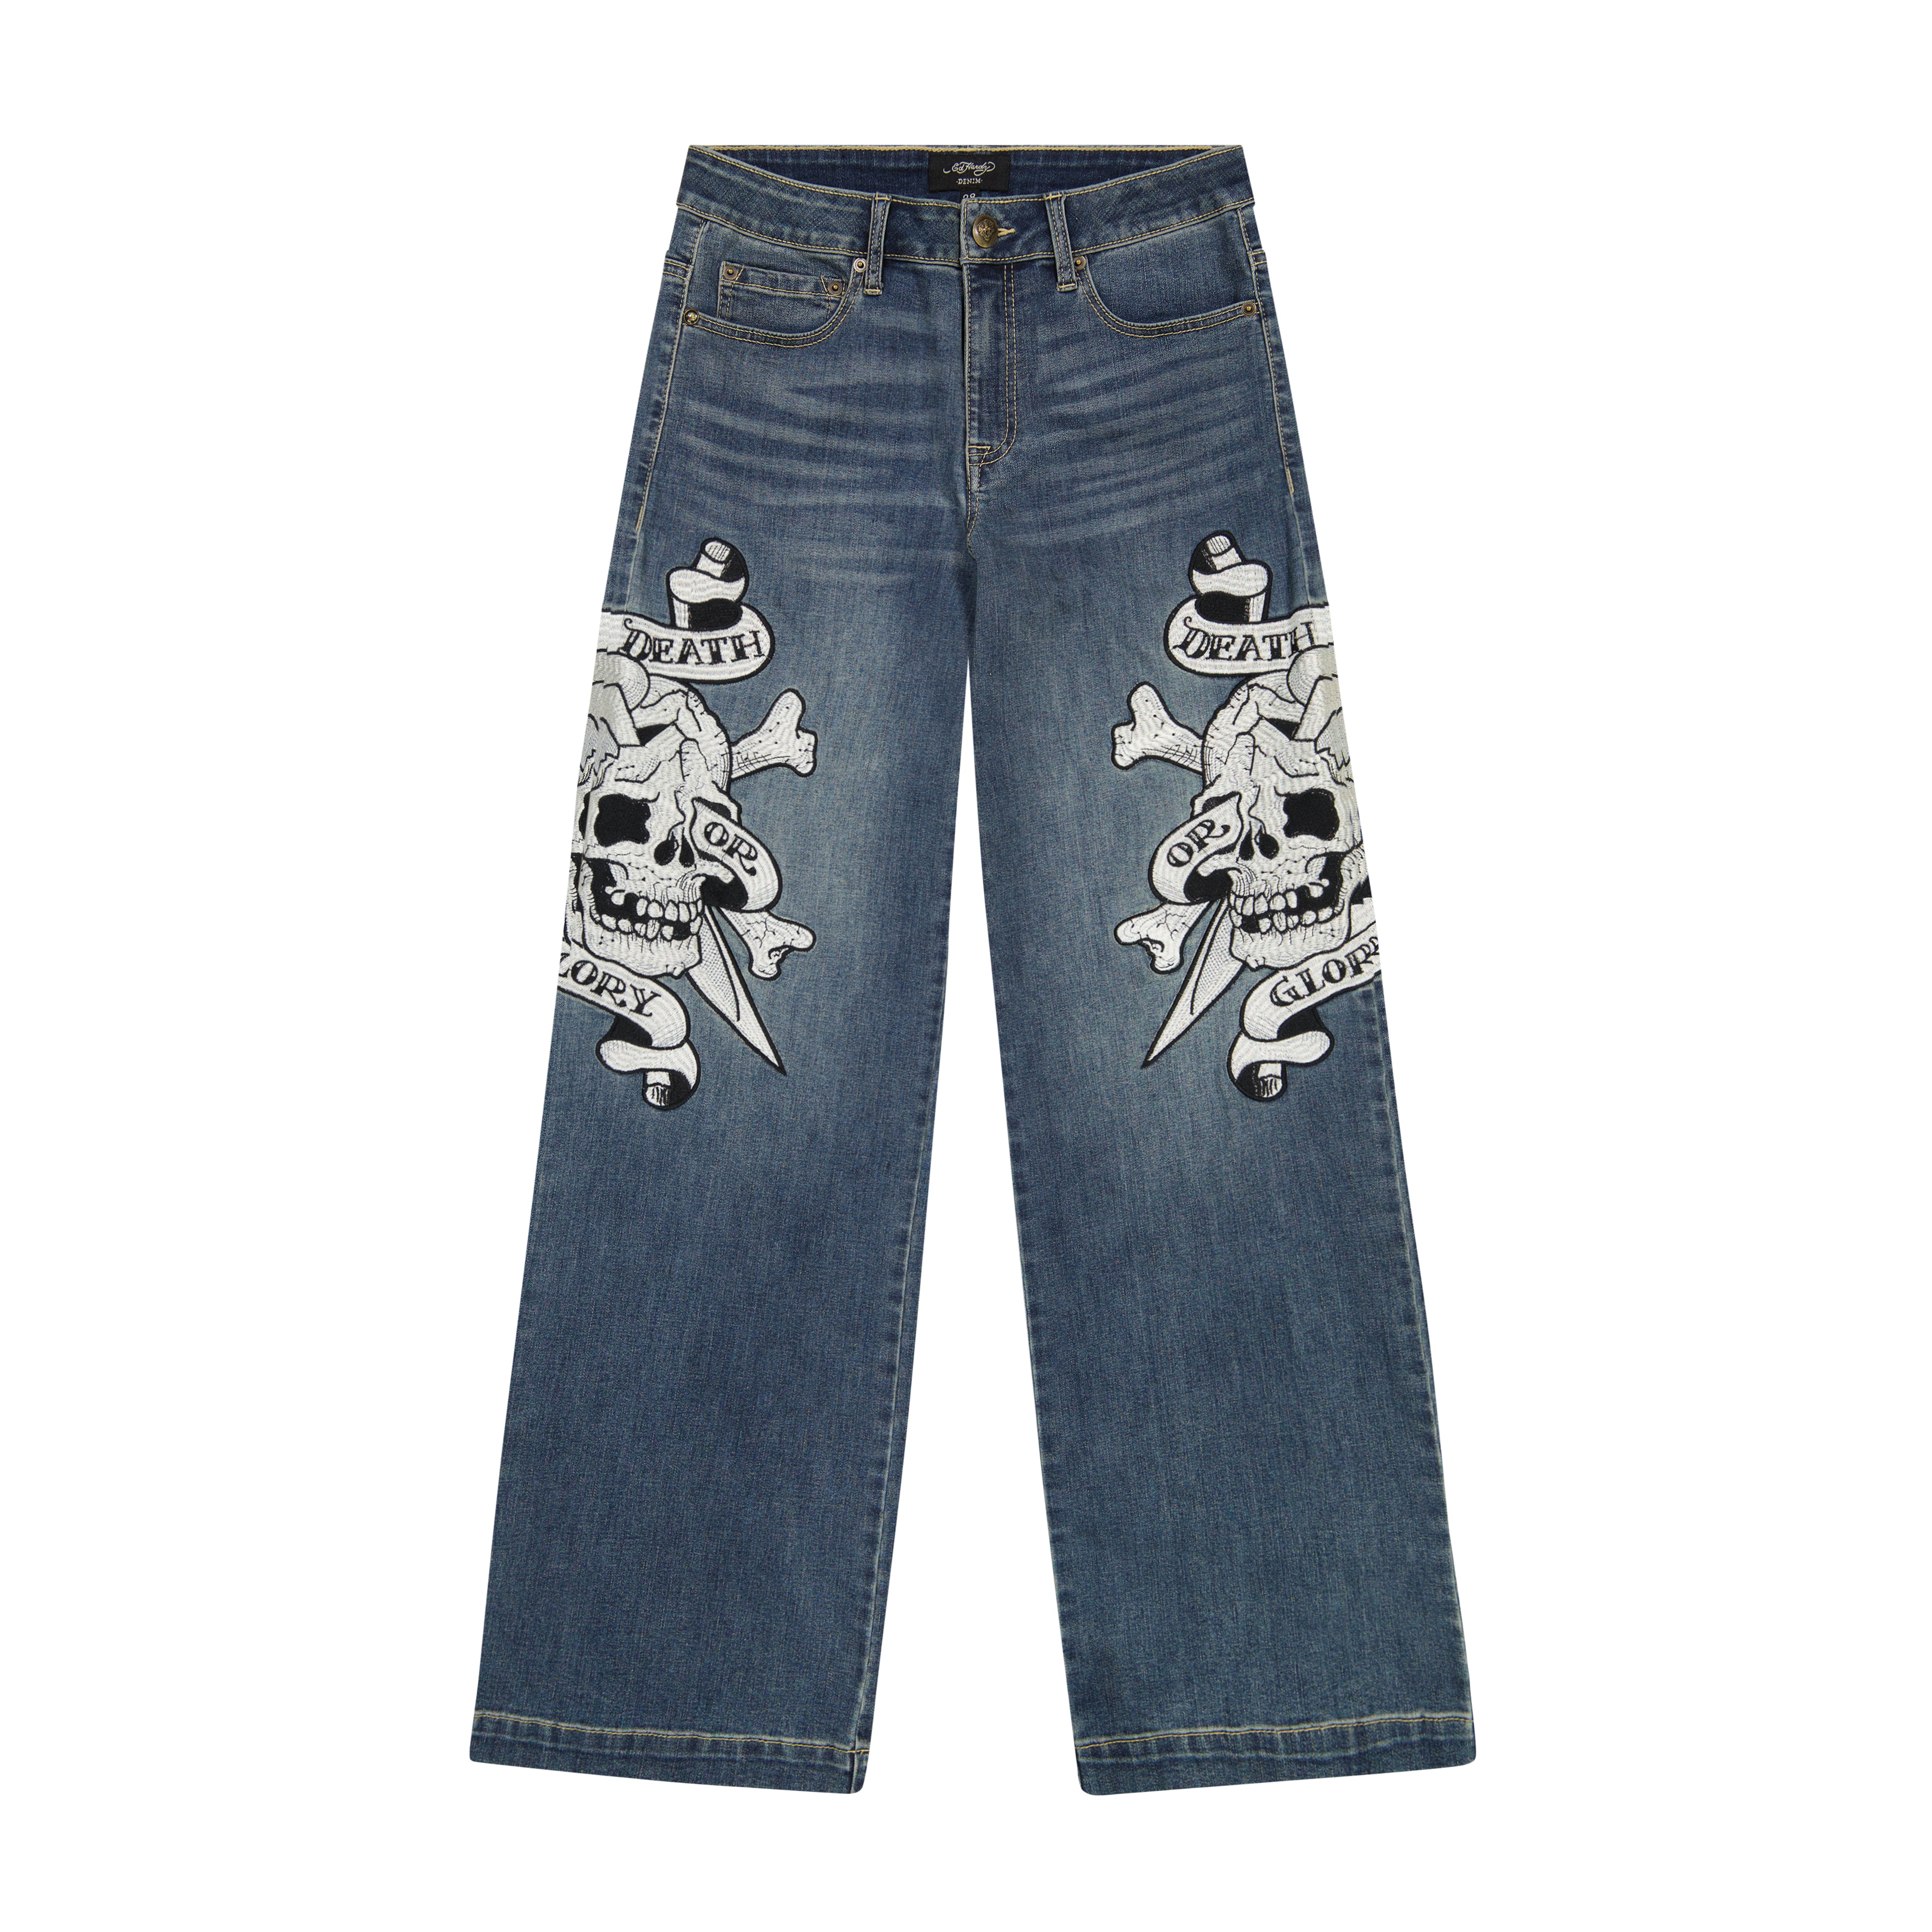 Buy M/L Ed Hardy Crazy Yoga Pants Hand Painted Denim Jeans up